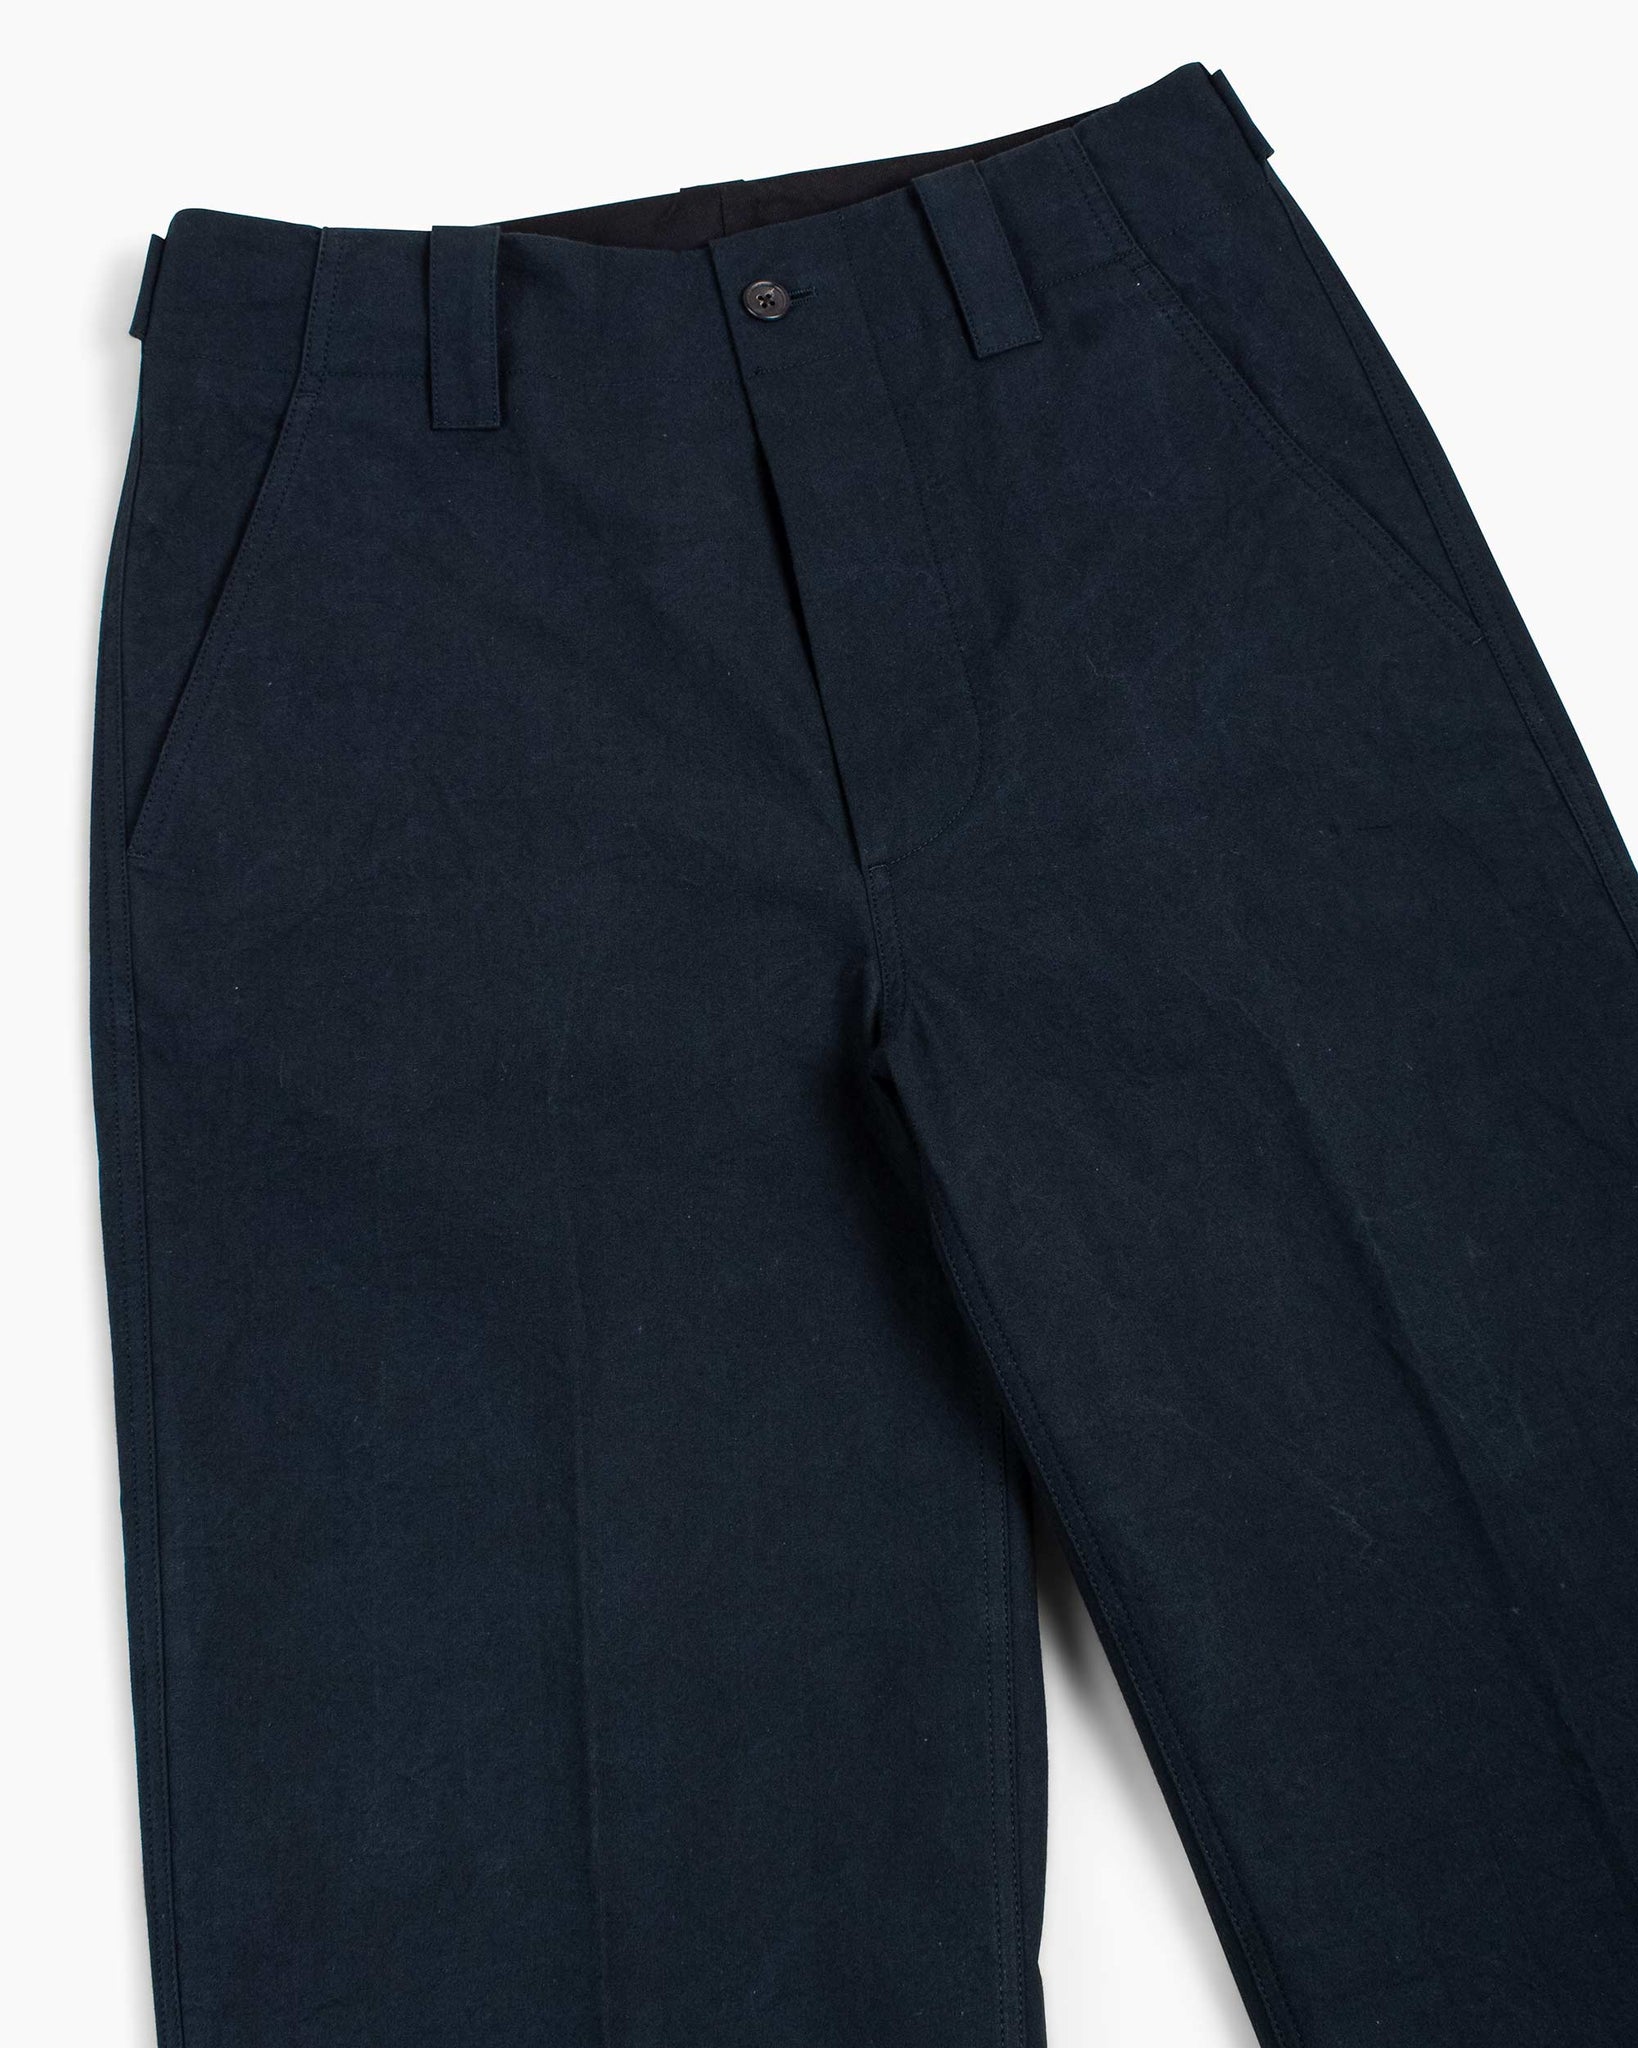 Margaret Howell Cropped Trouser Dry Compact Cotton Ink Details